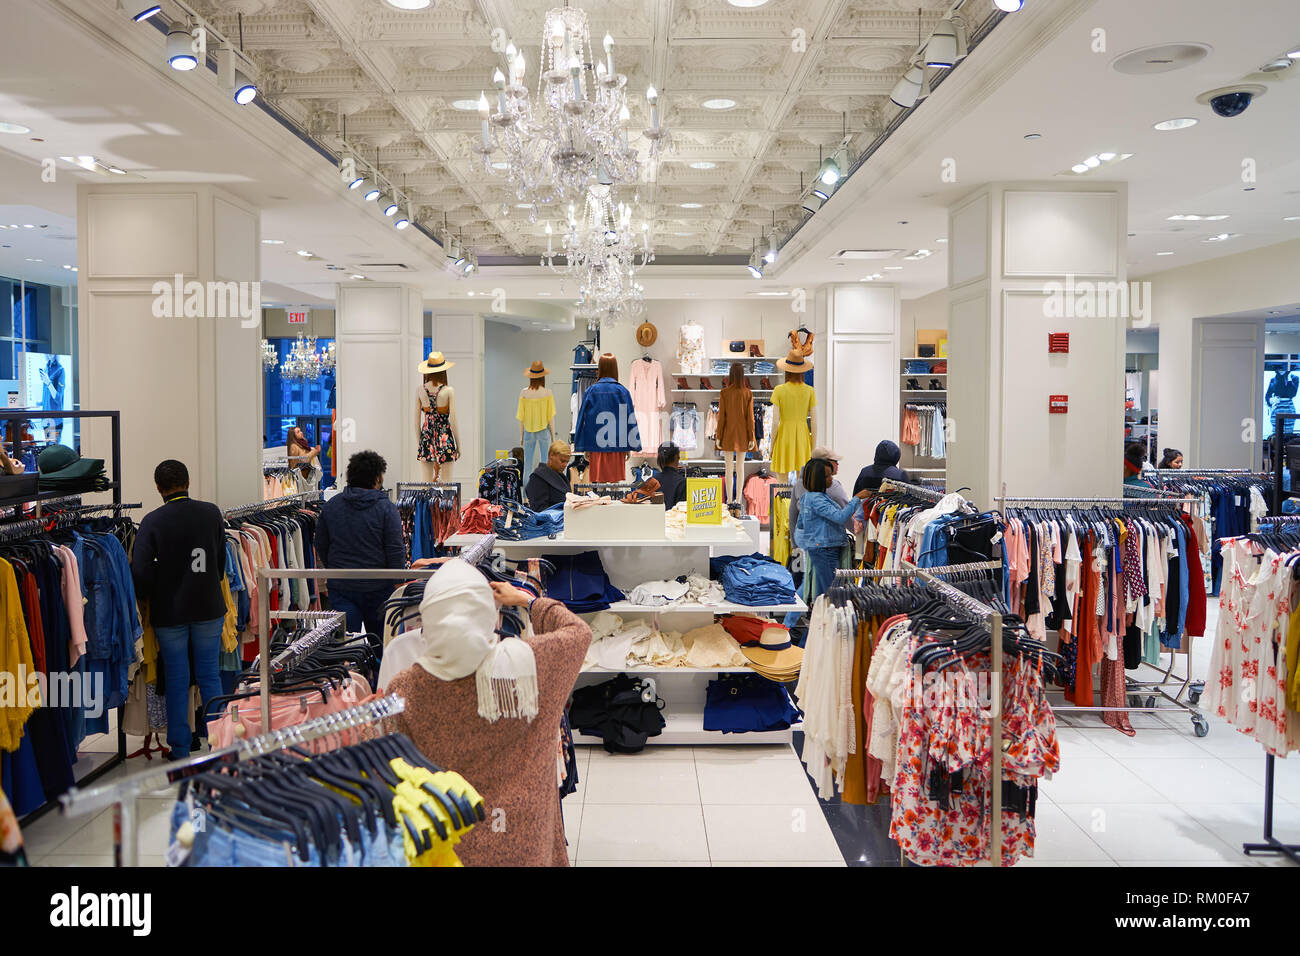 CHICAGO, IL - APRIL 01, 2016: inside Forever 21 store. Forever 21 is an ...